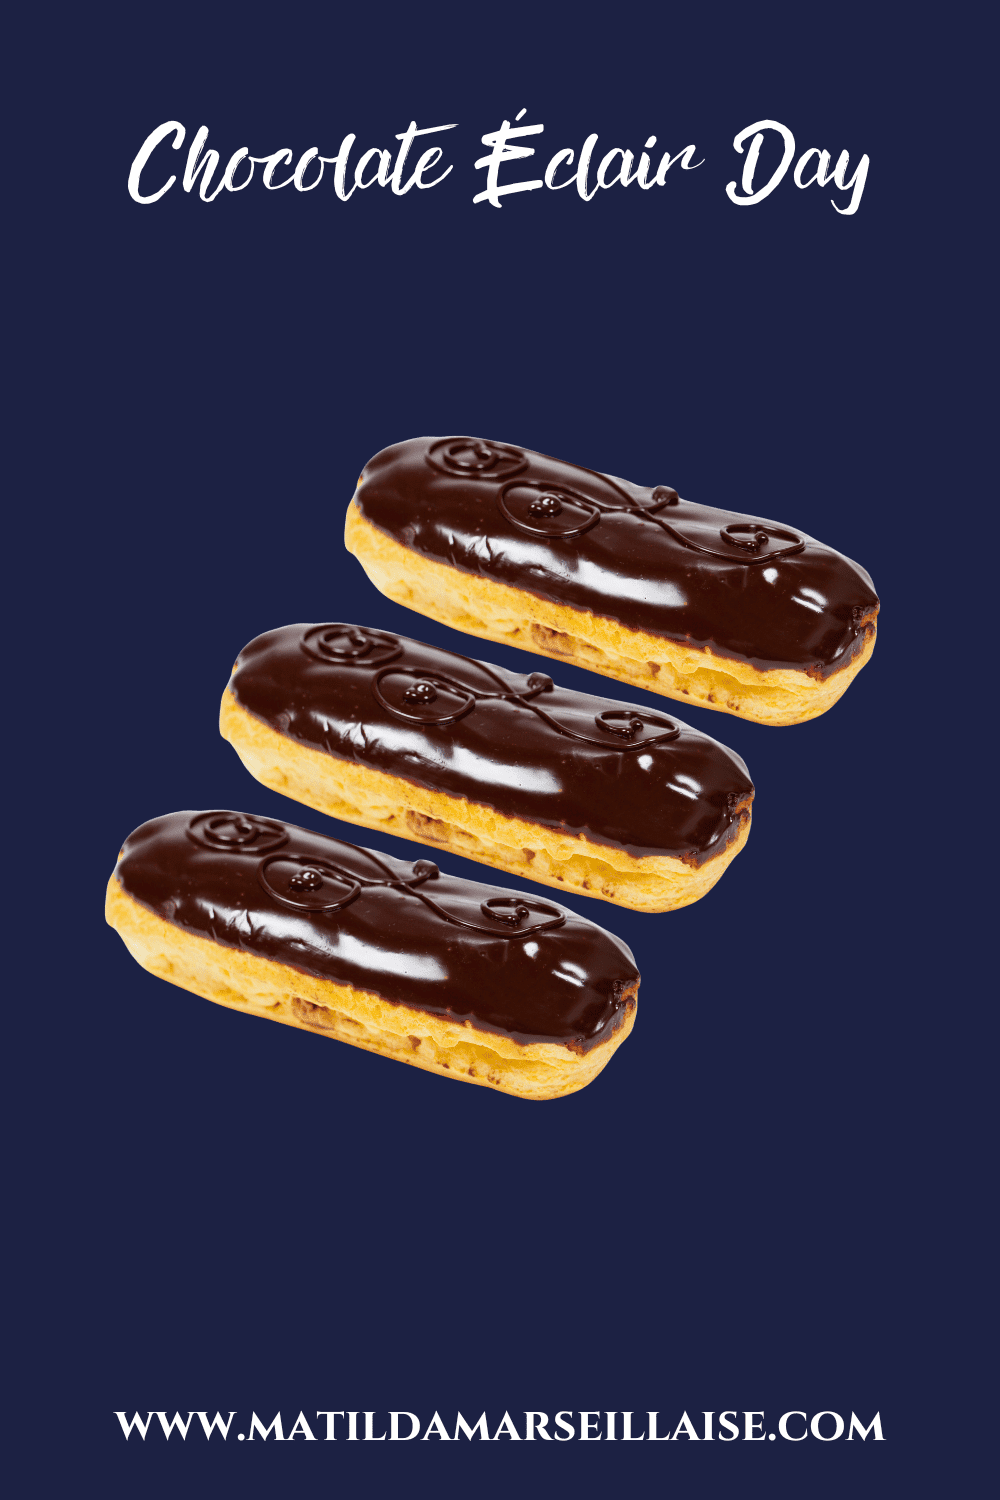 Chocolate Eclair Day : be quick because it’ll be gone in a flash